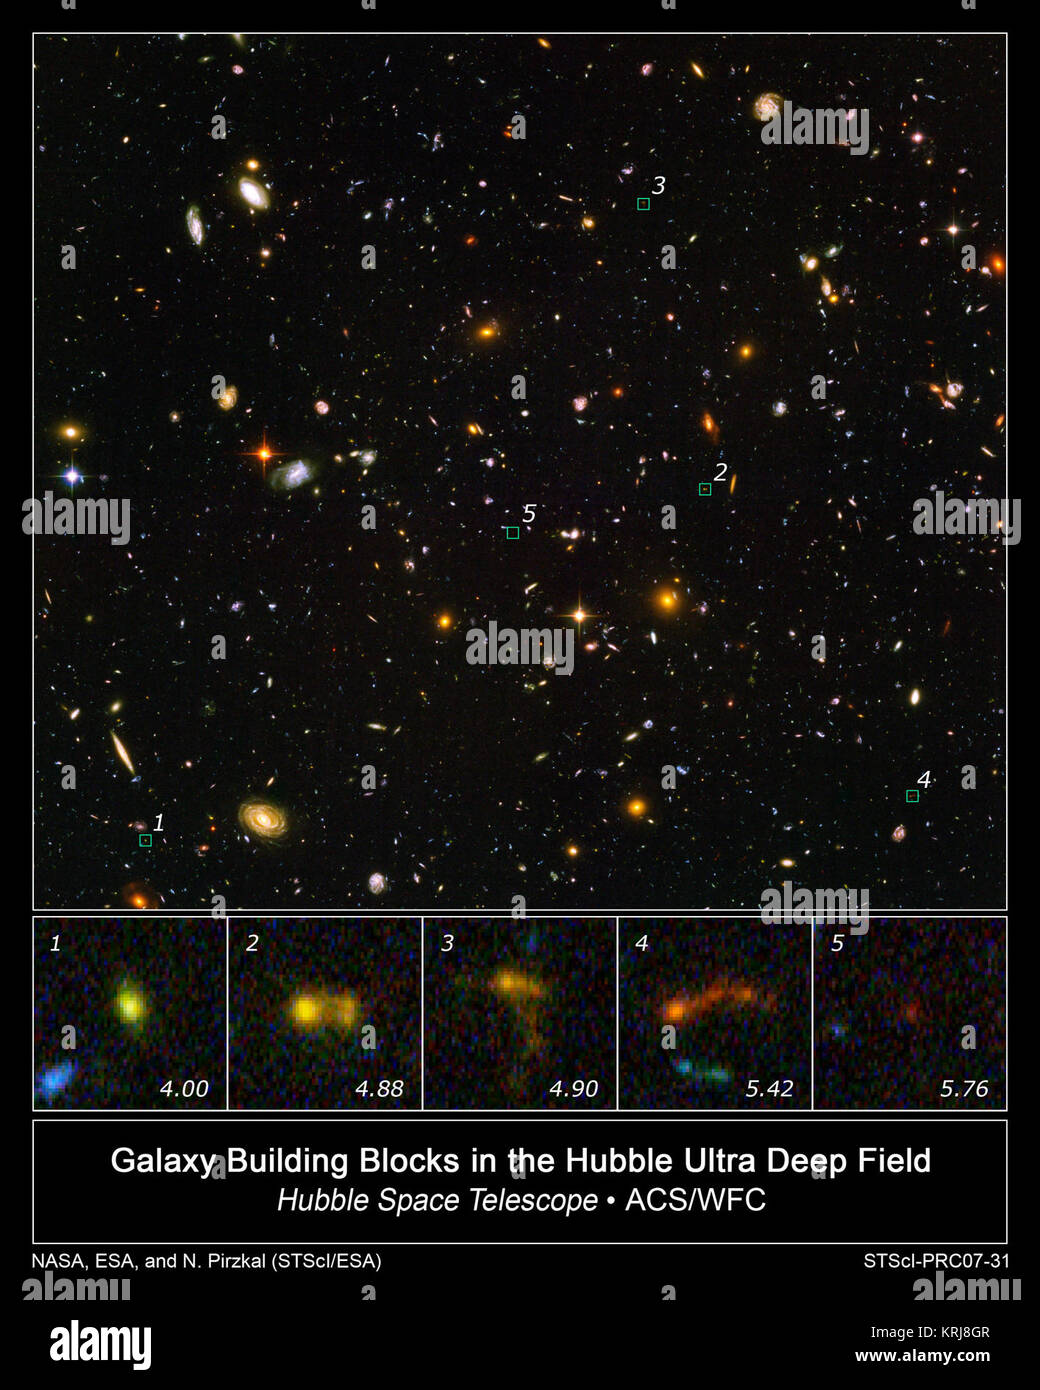 In this image of the Hubble Ultra Deep Field, several objects are identified as the faintest, most compact galaxies ever observed in the distant universe. They are so far away that we see them as they looked less than one billion years after the Big Bang. Blazing with the brilliance of millions of stars, each of the newly discovered galaxies is a hundred to a thousand times smaller than our Milky Way Galaxy.  The bottom row of pictures shows several of these clumps (distance expressed in redshift value). Three of the galaxies appear to be slightly disrupted. Rather than being shaped like round Stock Photo